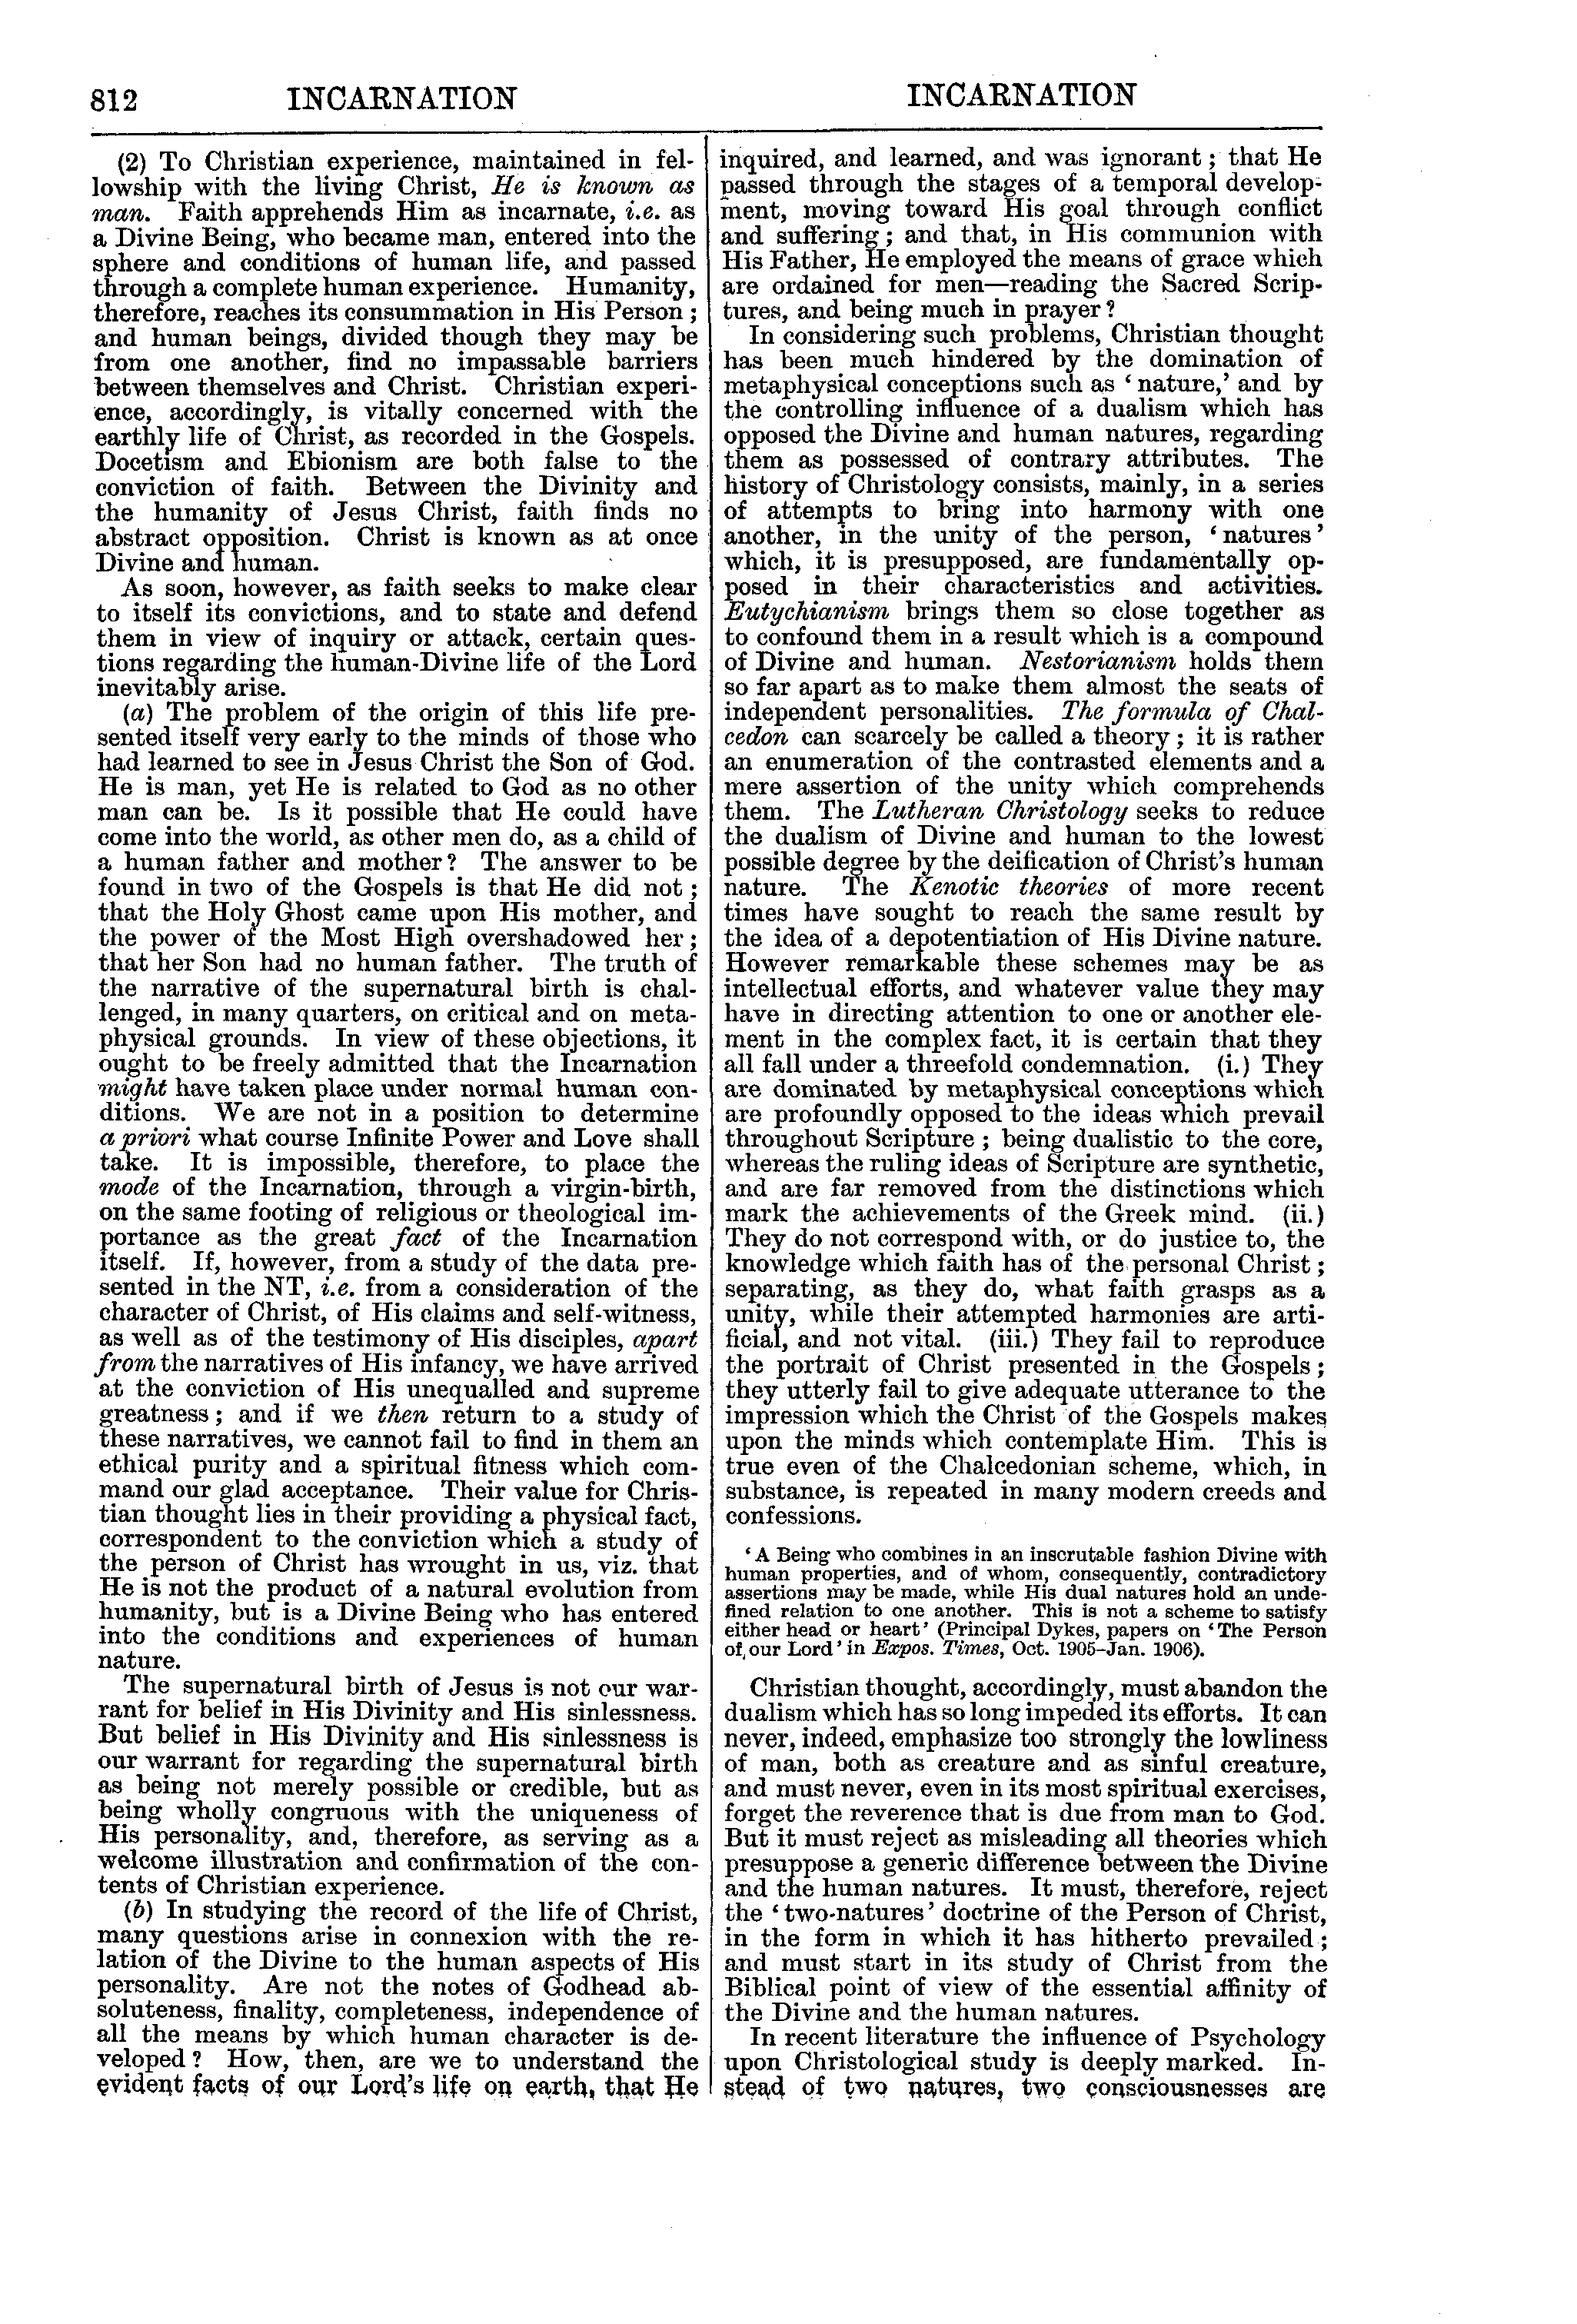 Image of page 812